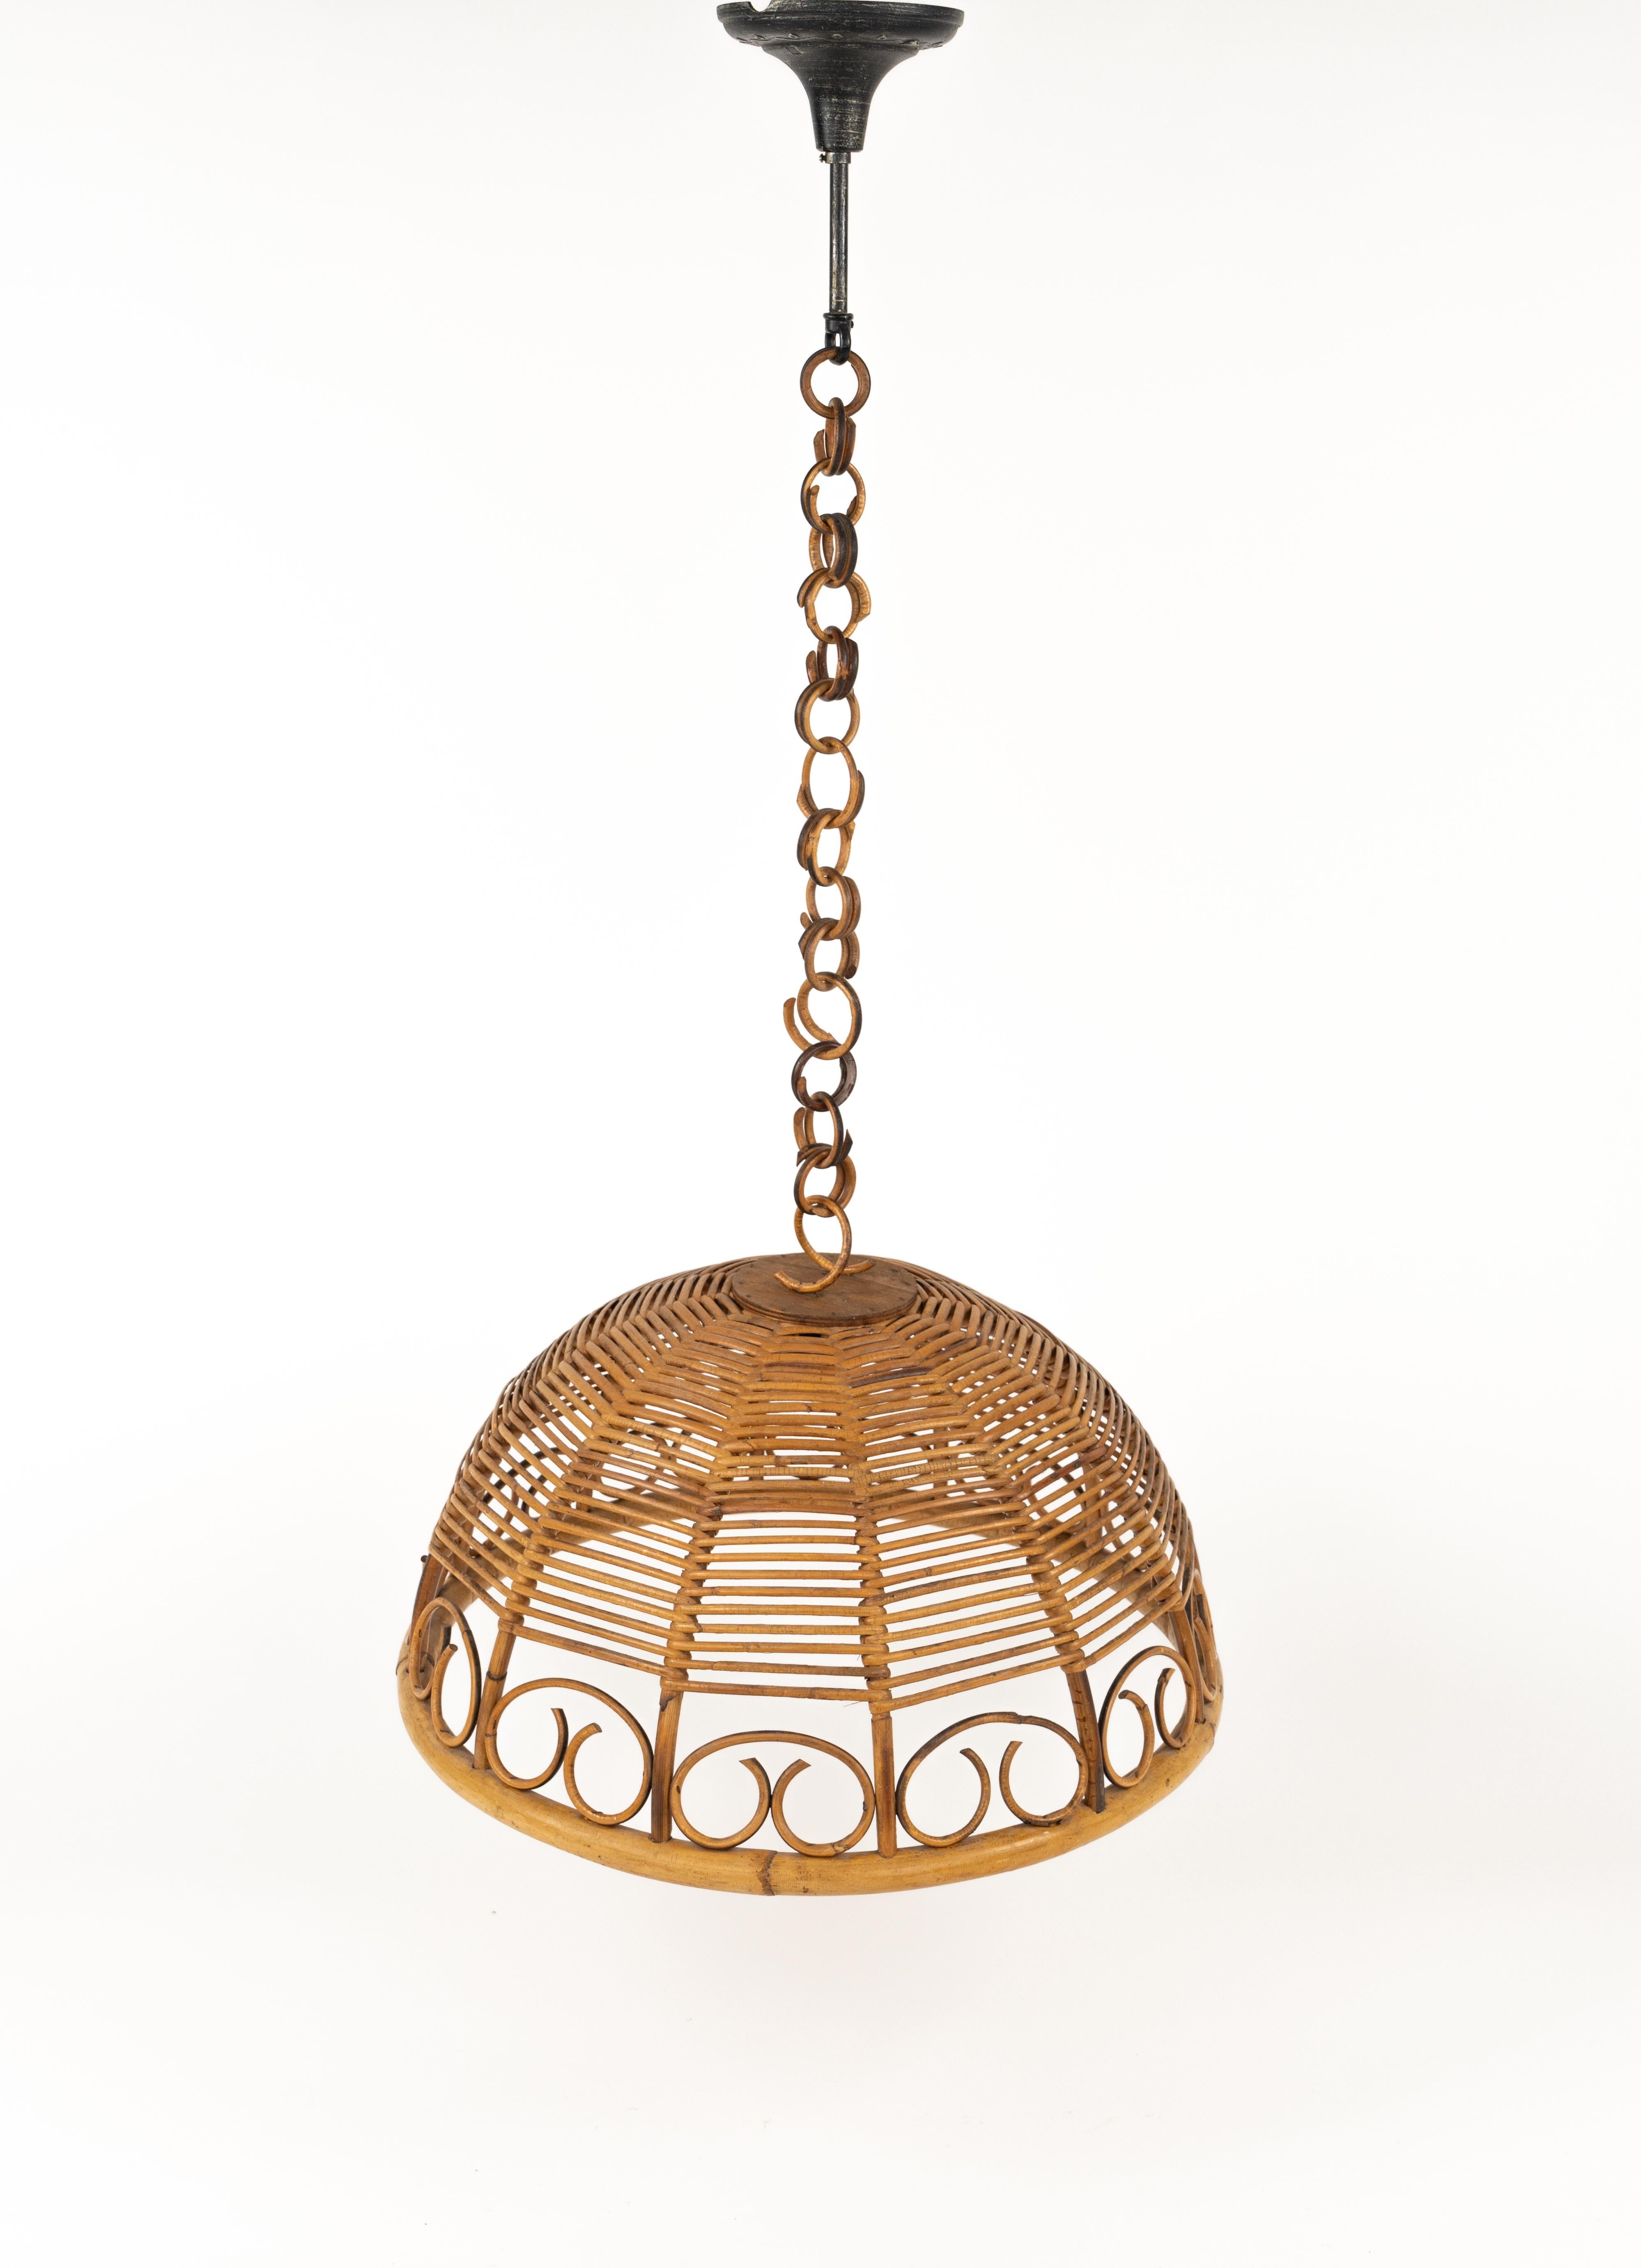 Midcentury Rattan and Bamboo Chandelier Pendant, Italy 1960s For Sale 2